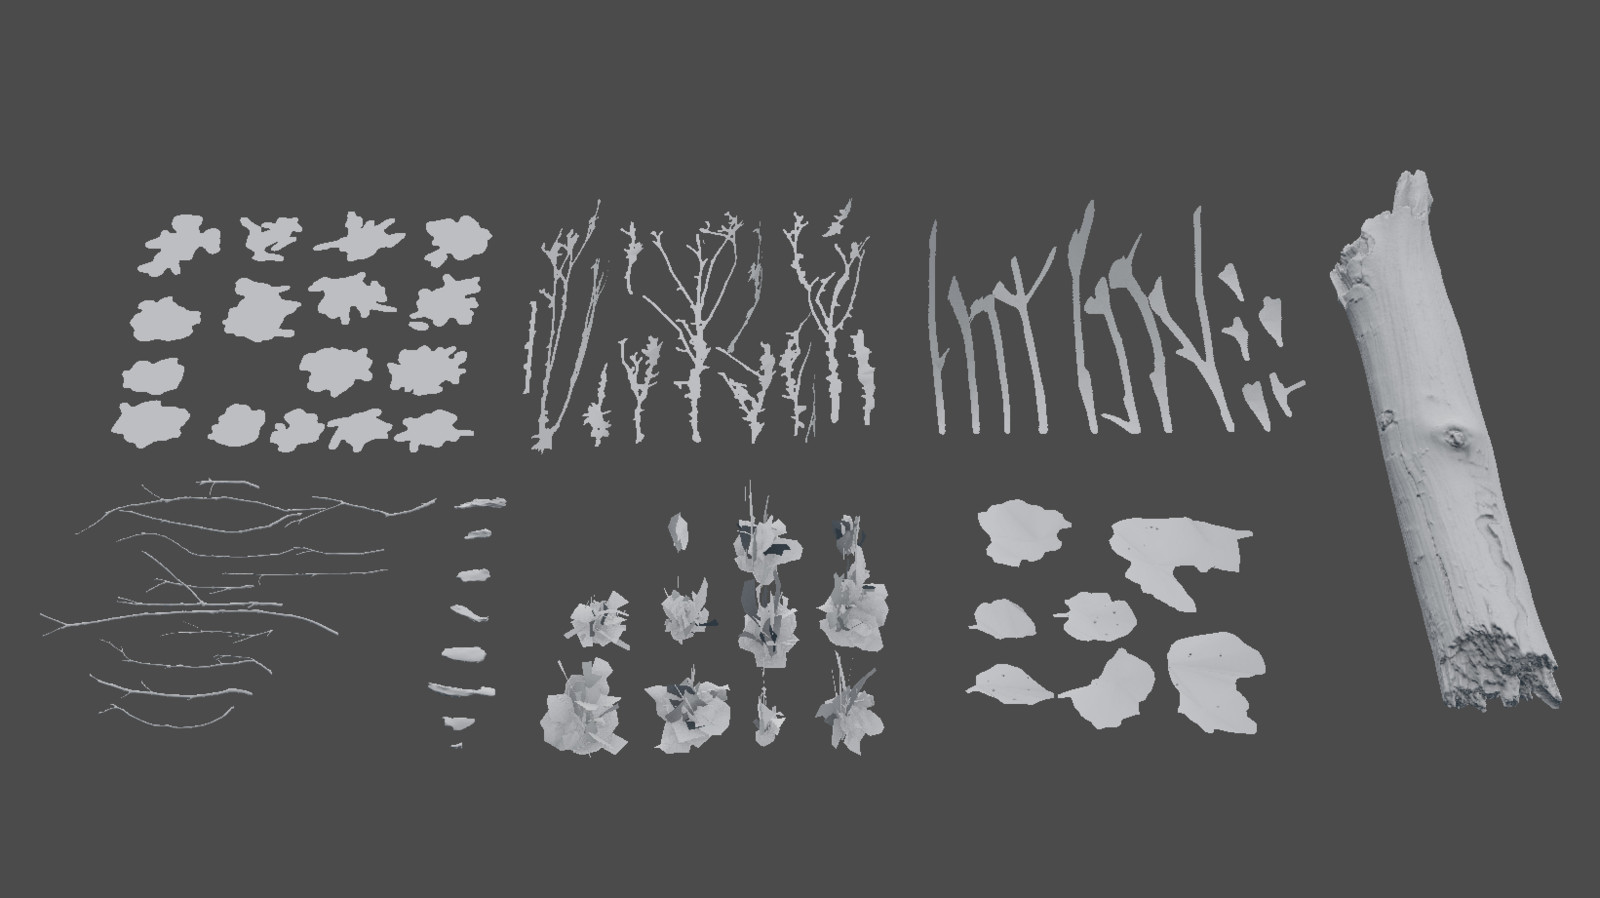 Megascan groups that are generated with blenders particle system.